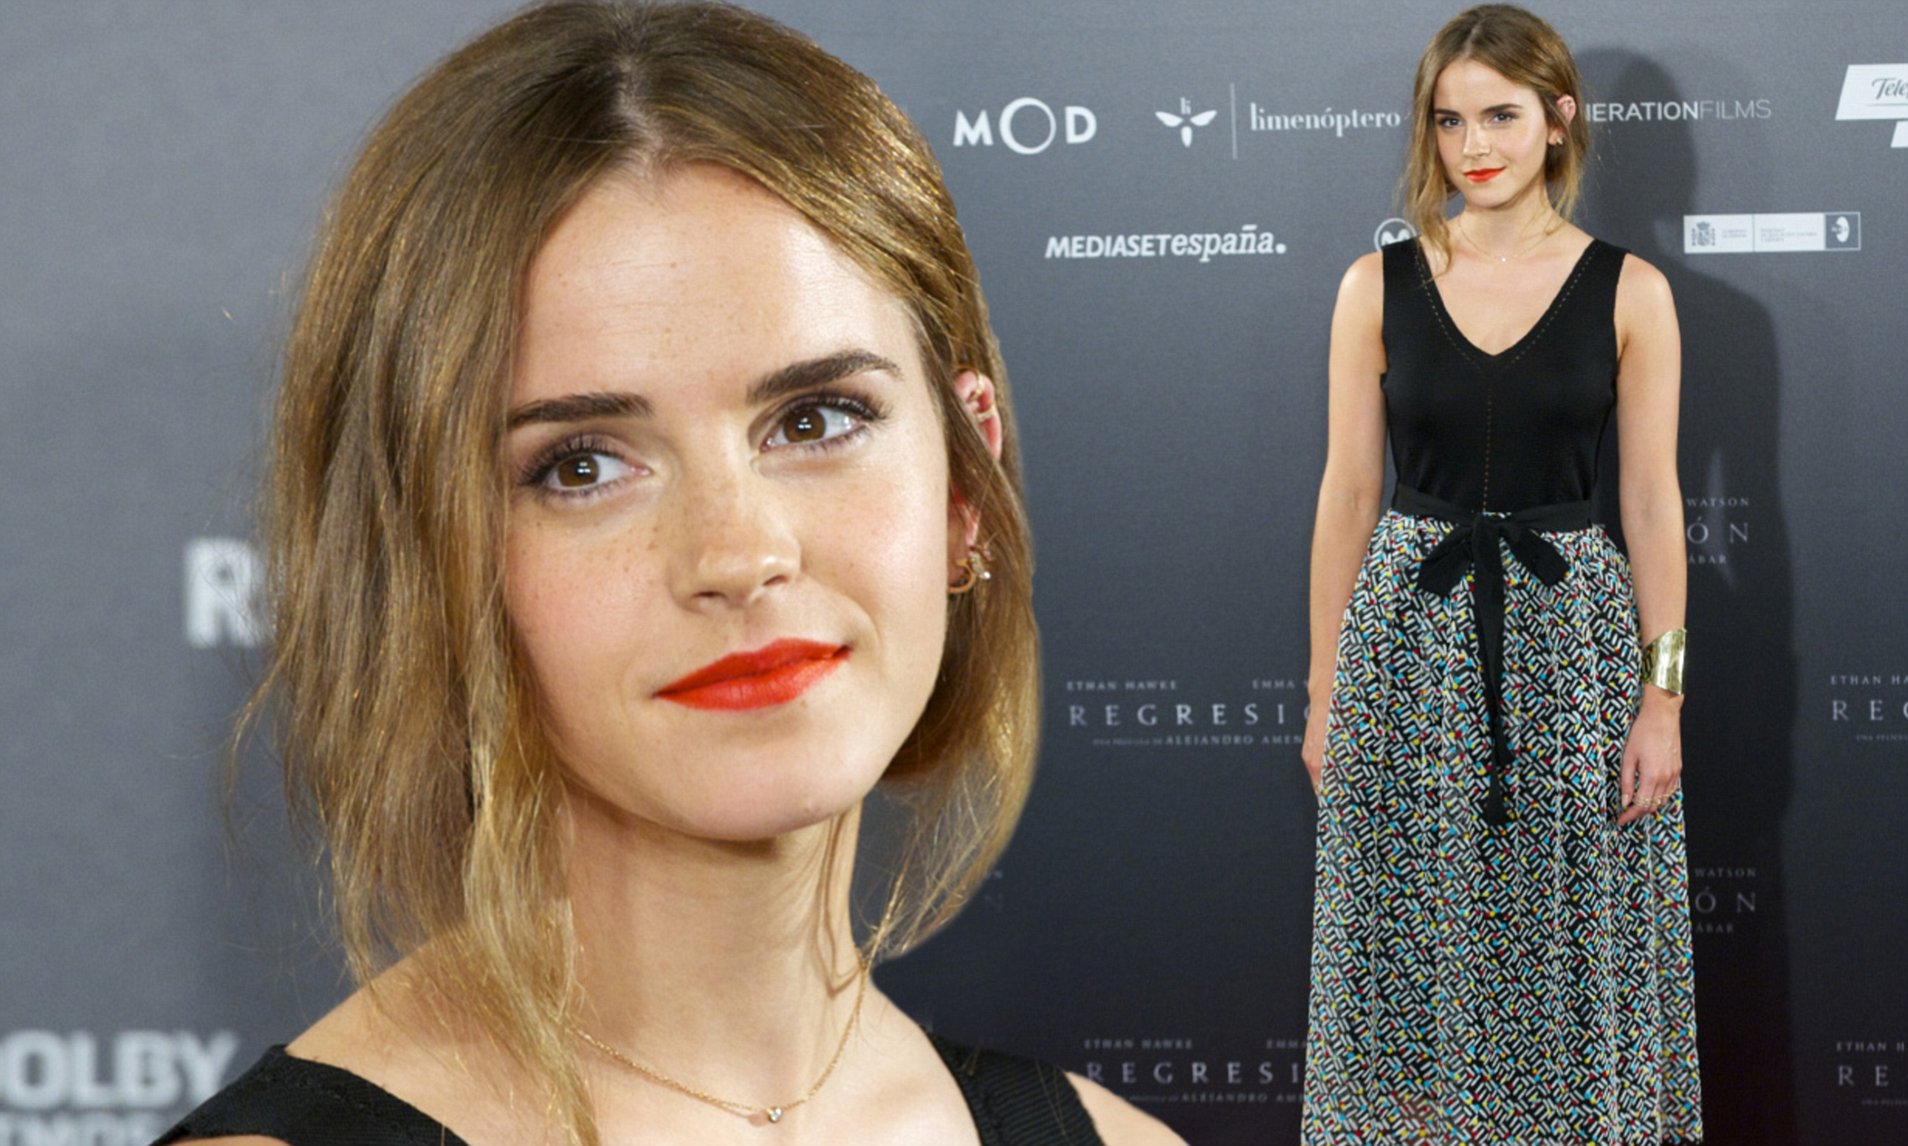 auni nabihah recommends regression emma watson topless pic